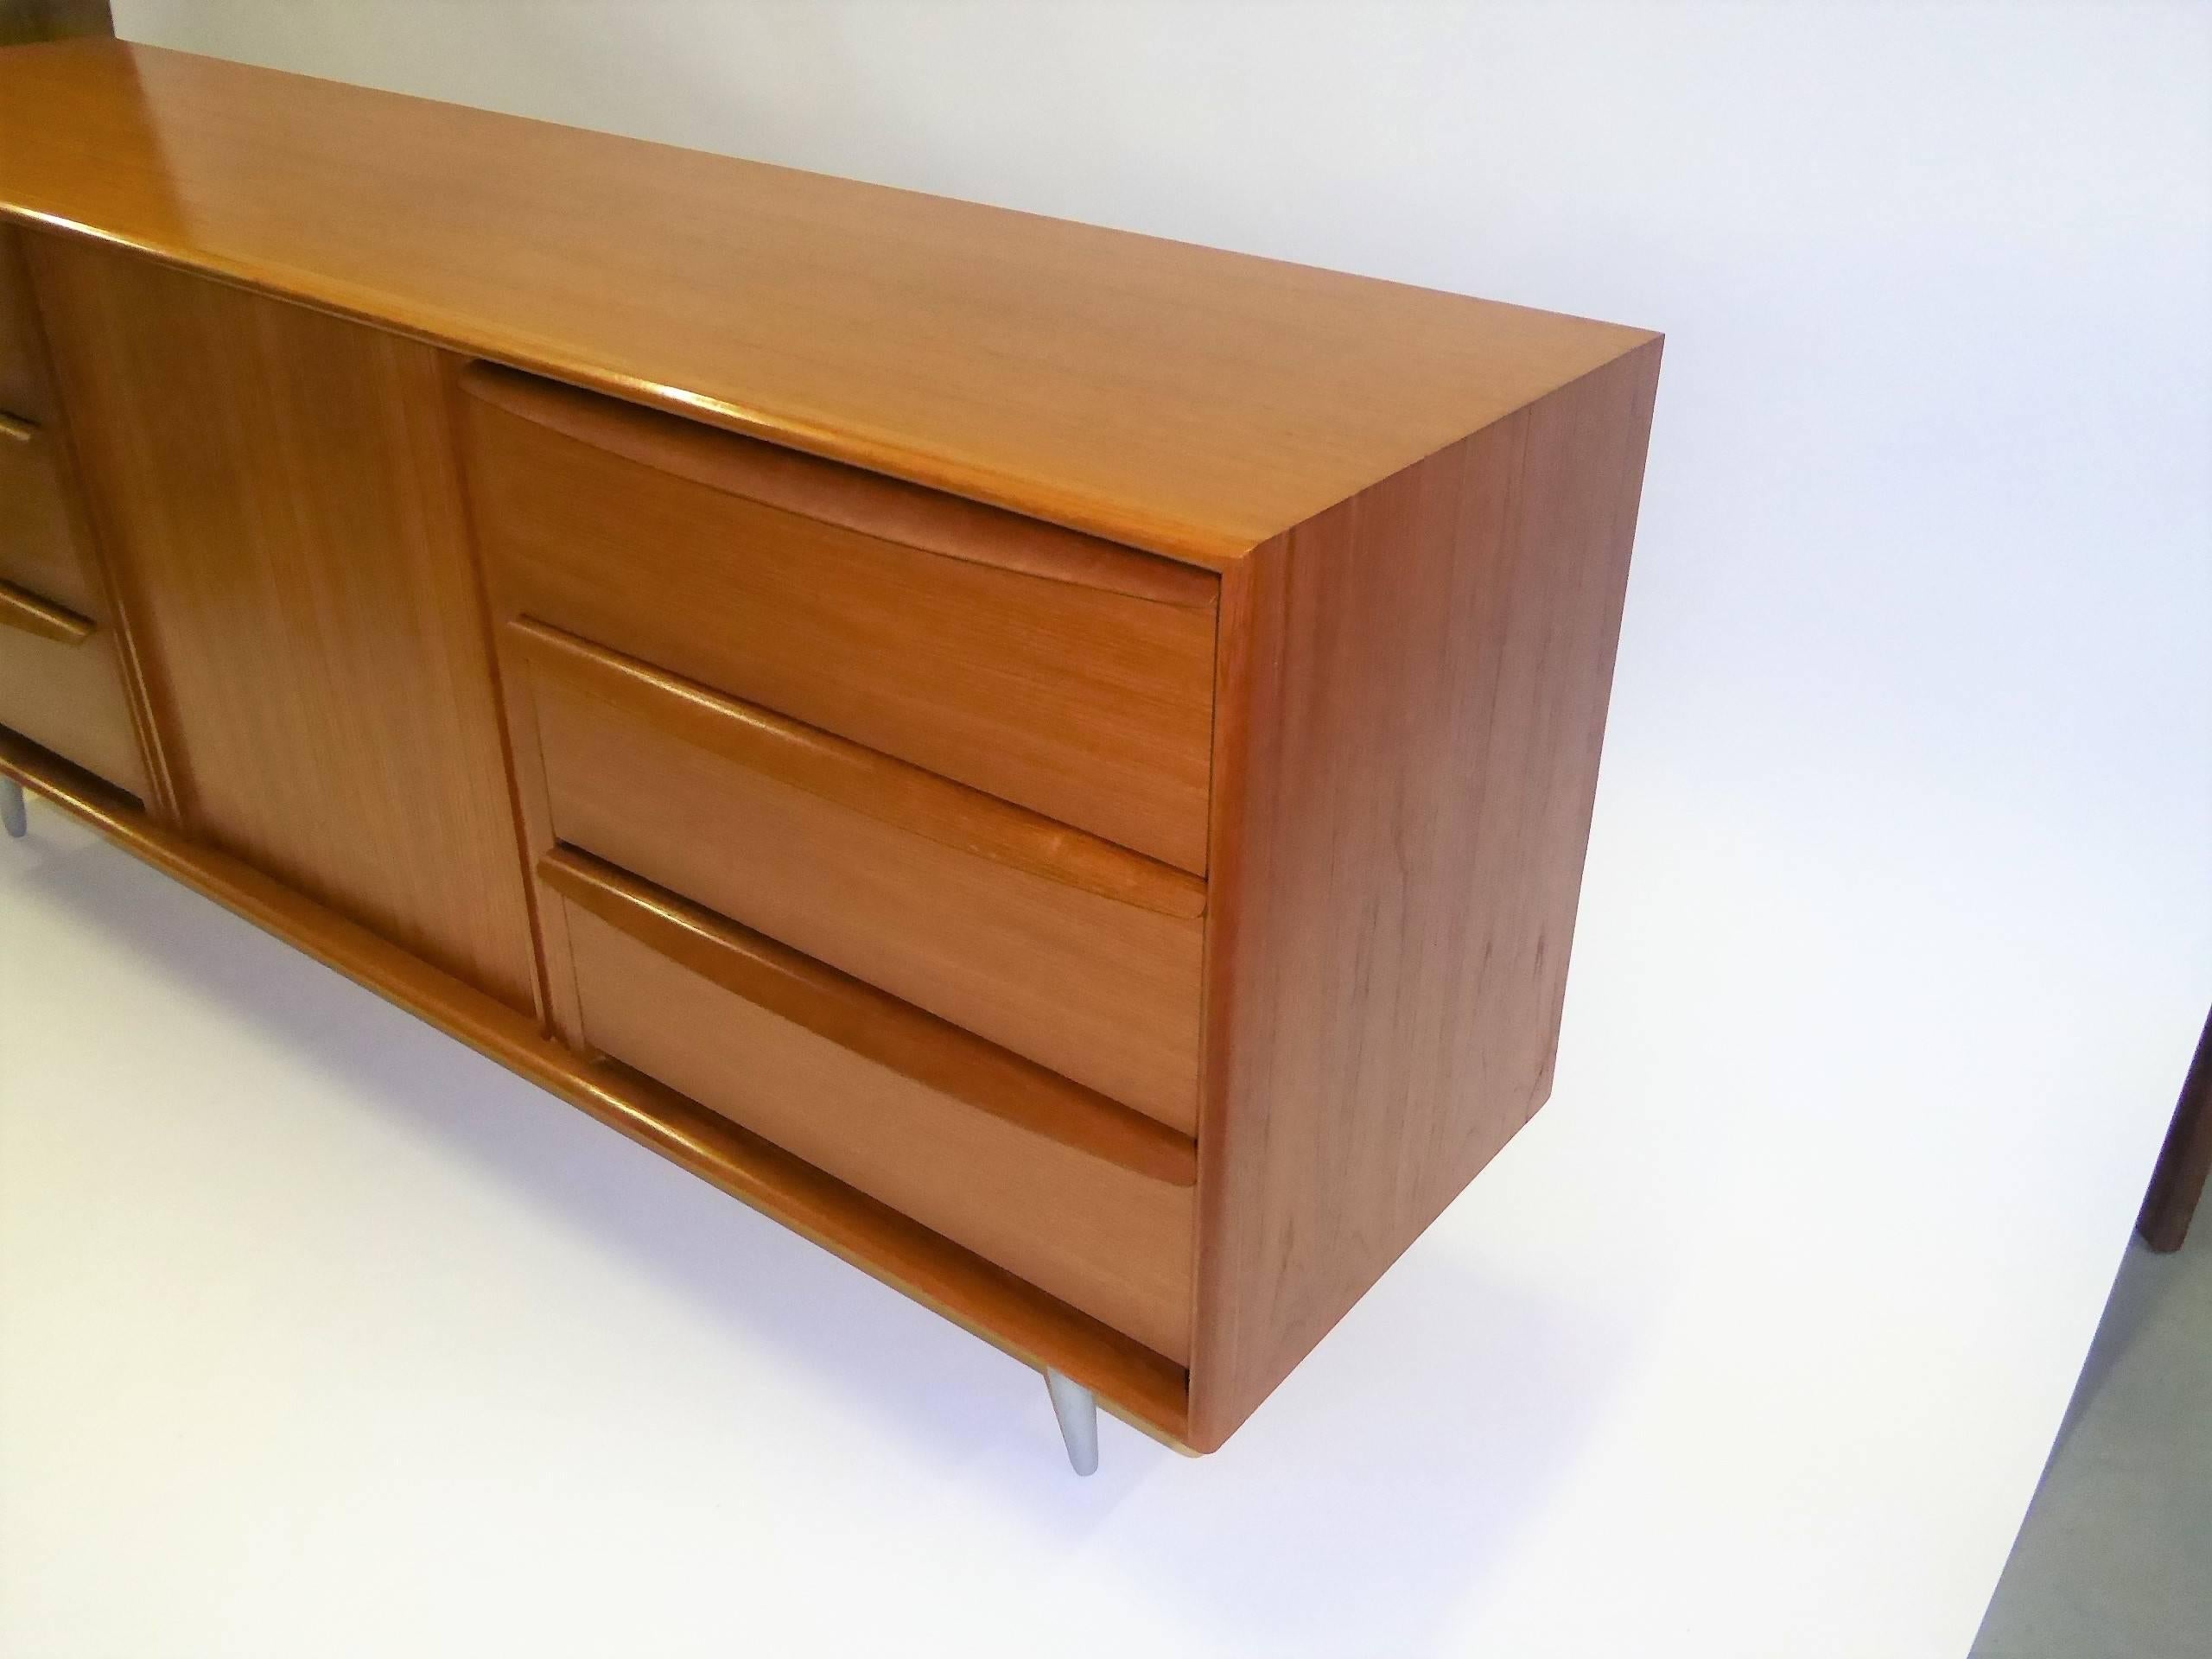 Very fine, 1970 Danish teak sideboard Credenza by Danflex Systems with six drawers and an adjustable shelf behind a centered tambour sliding door. Beautiful curved handles and molded edges and unique tapered legs in a matte finish aluminum.
Marked